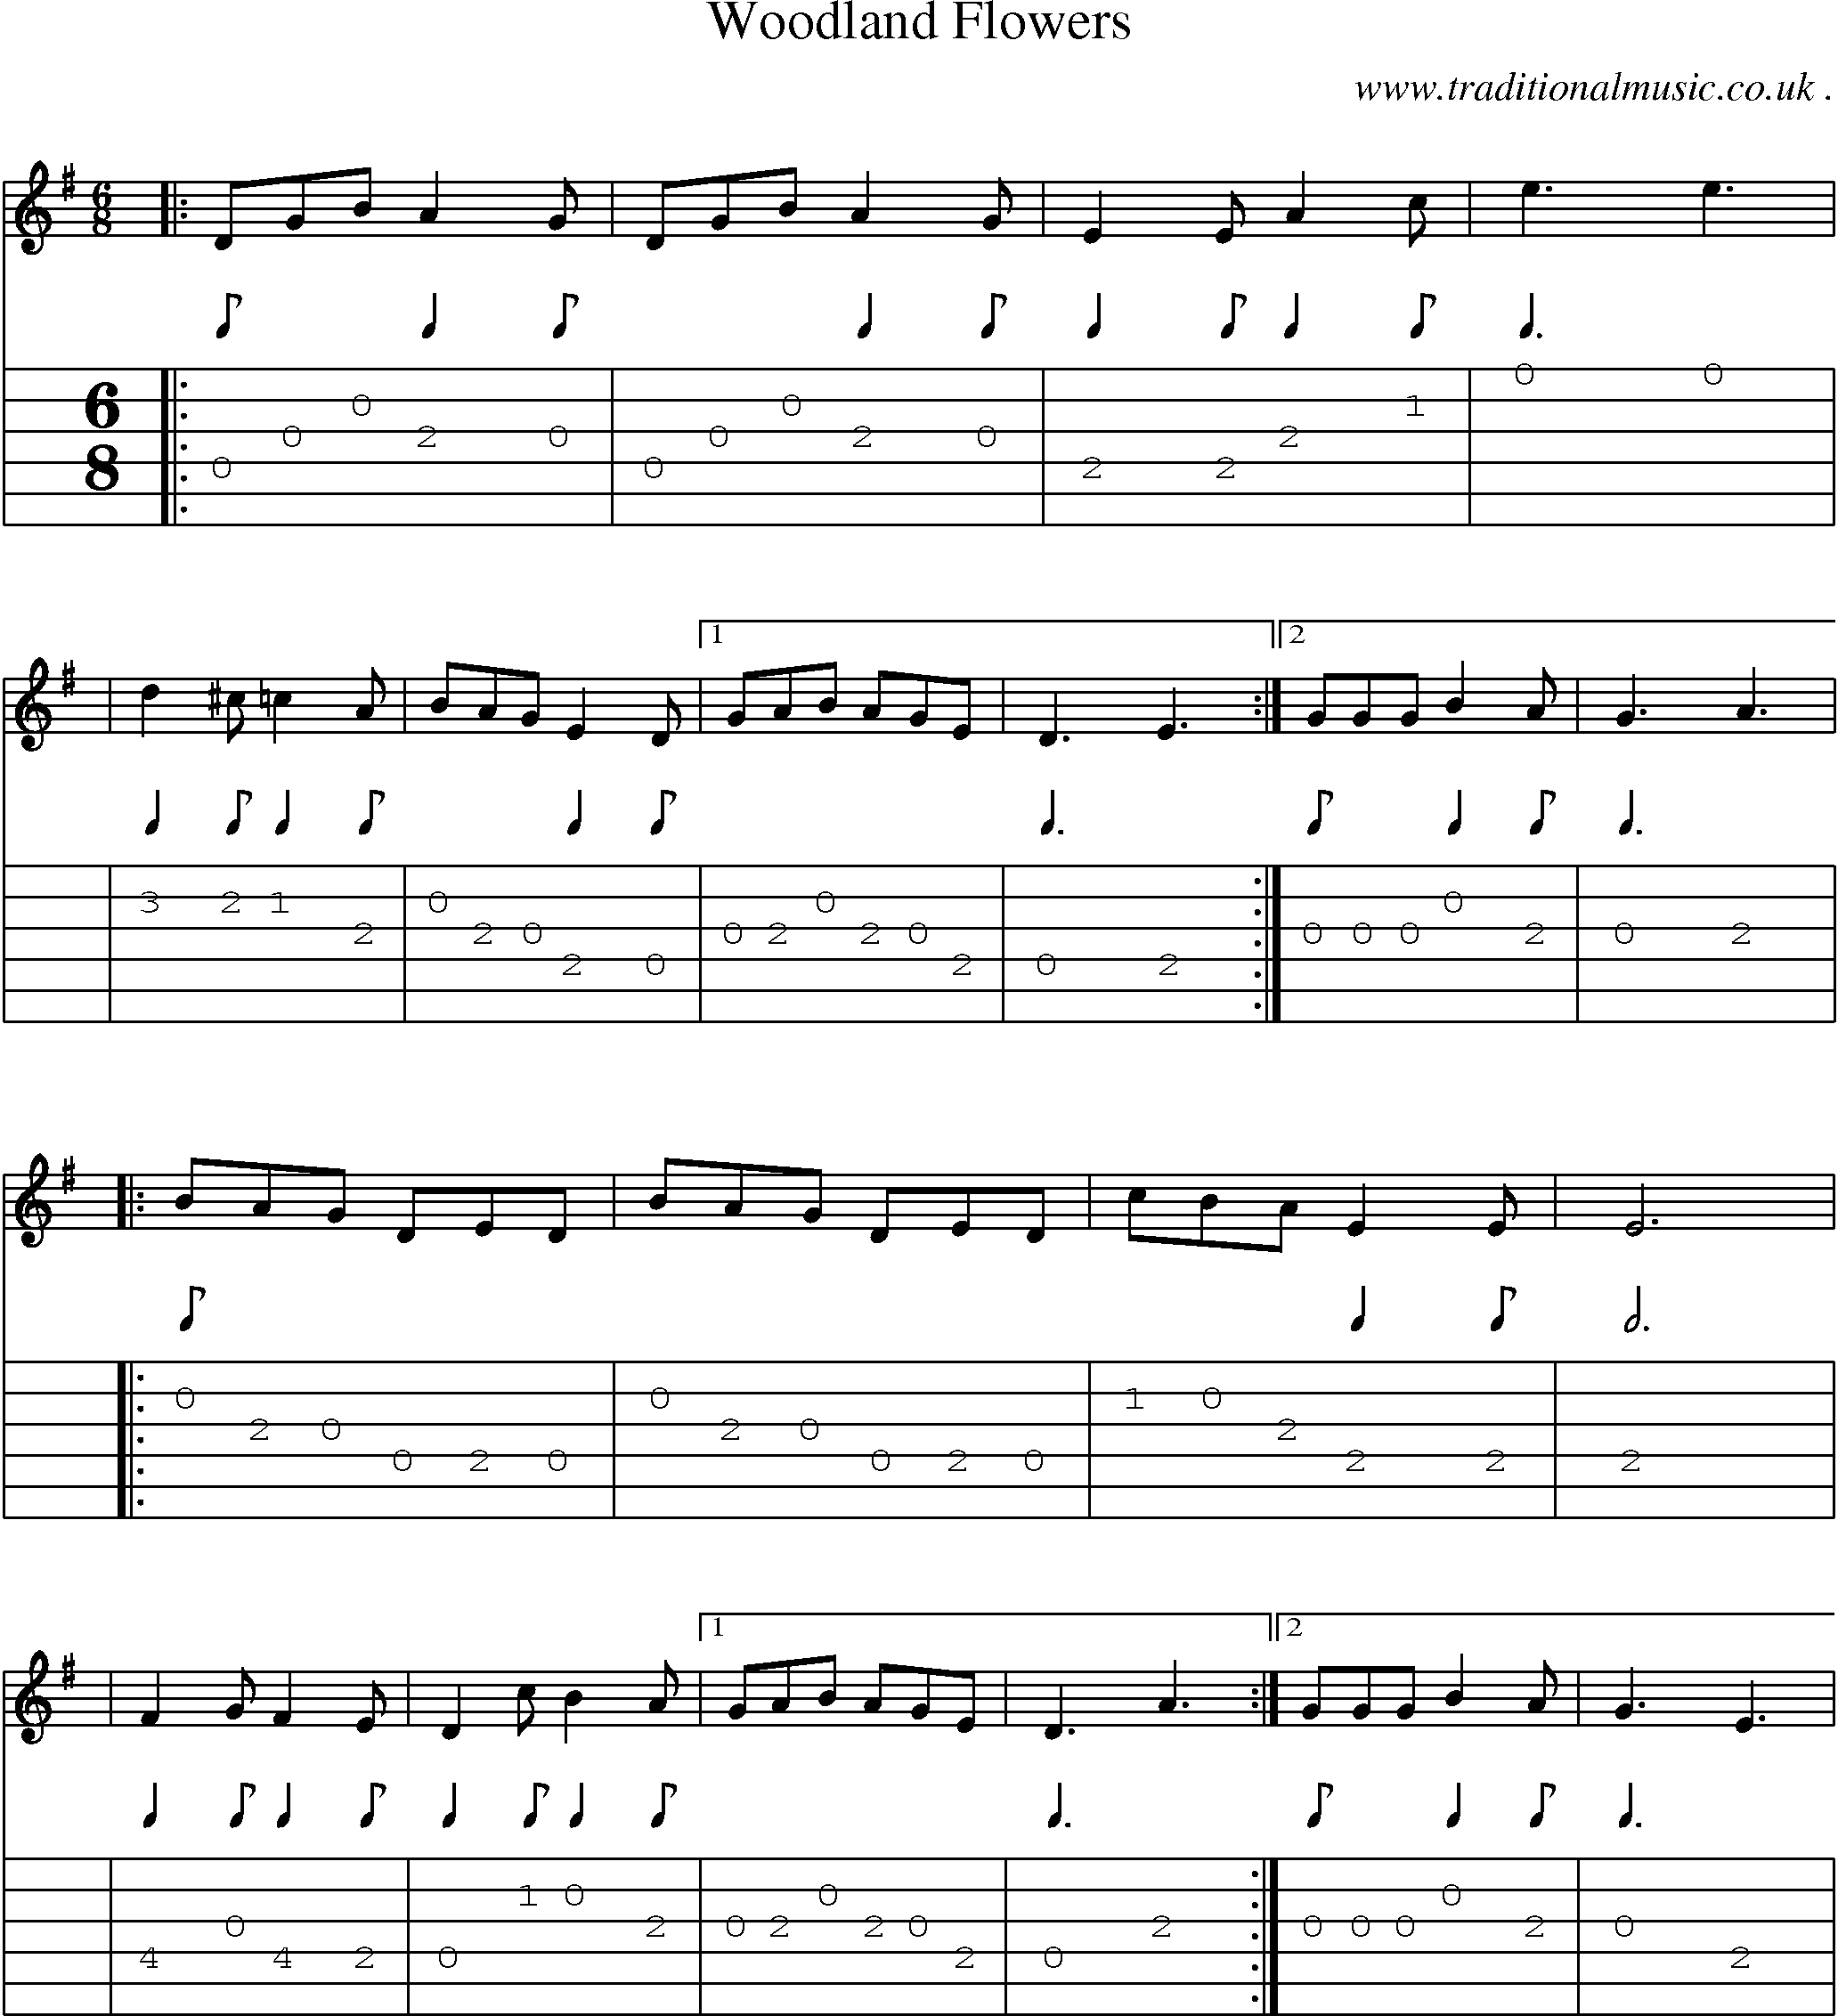 Sheet-Music and Guitar Tabs for Woodland Flowers